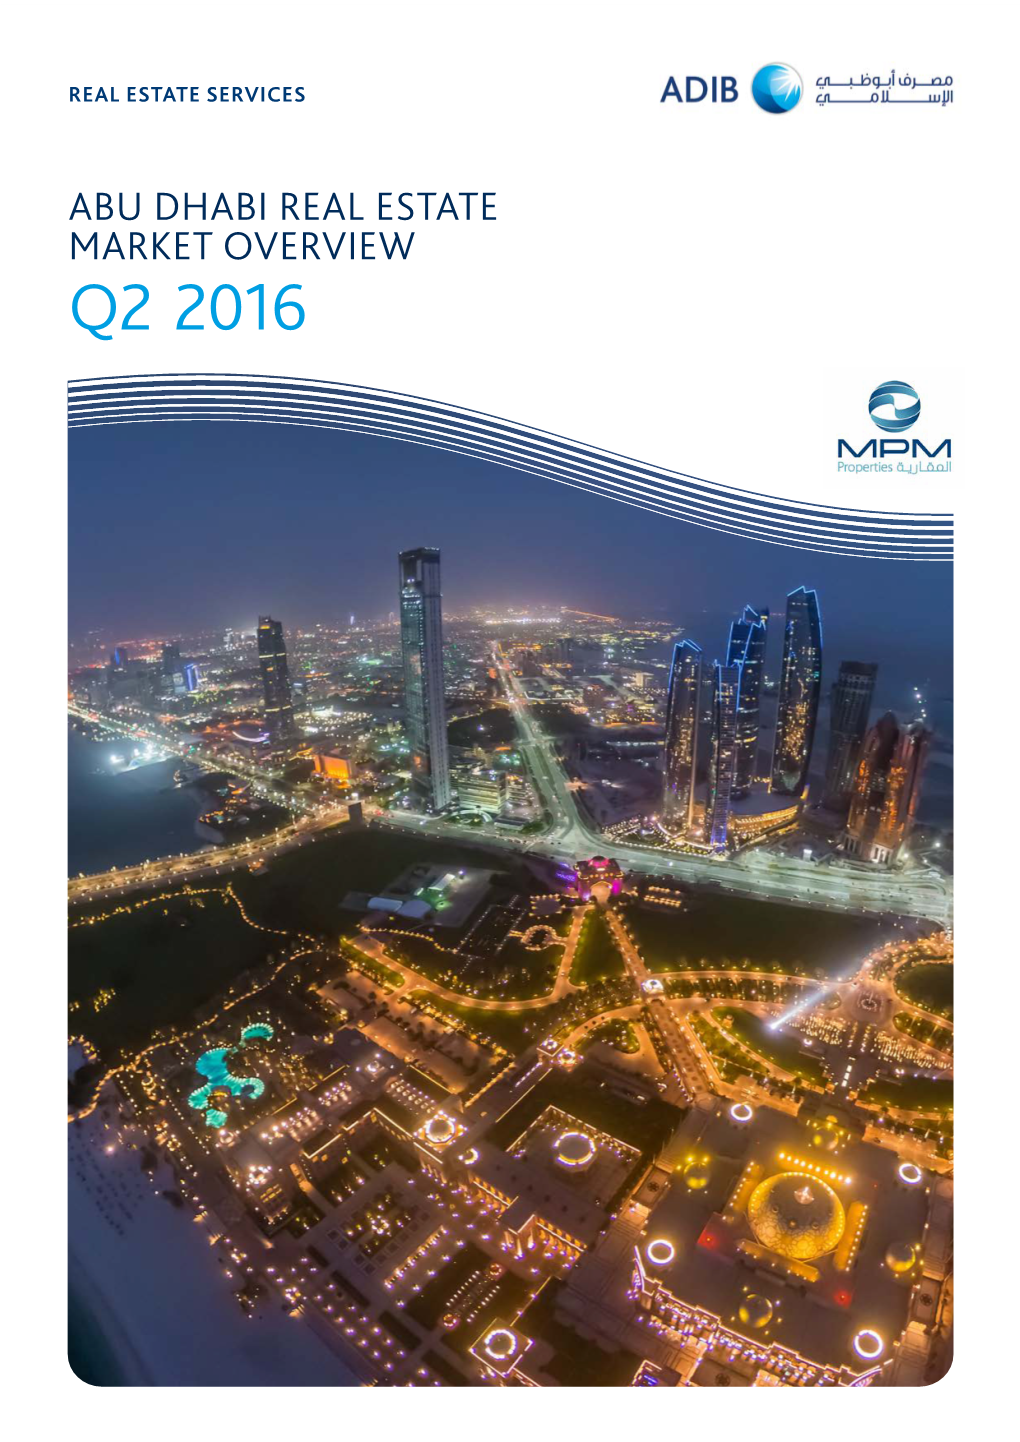 Abu Dhabi Real Estate Market Overview Q2 2016 Q2 2016 Real Estate Services | Abu Dhabi Real Estate Market Overview